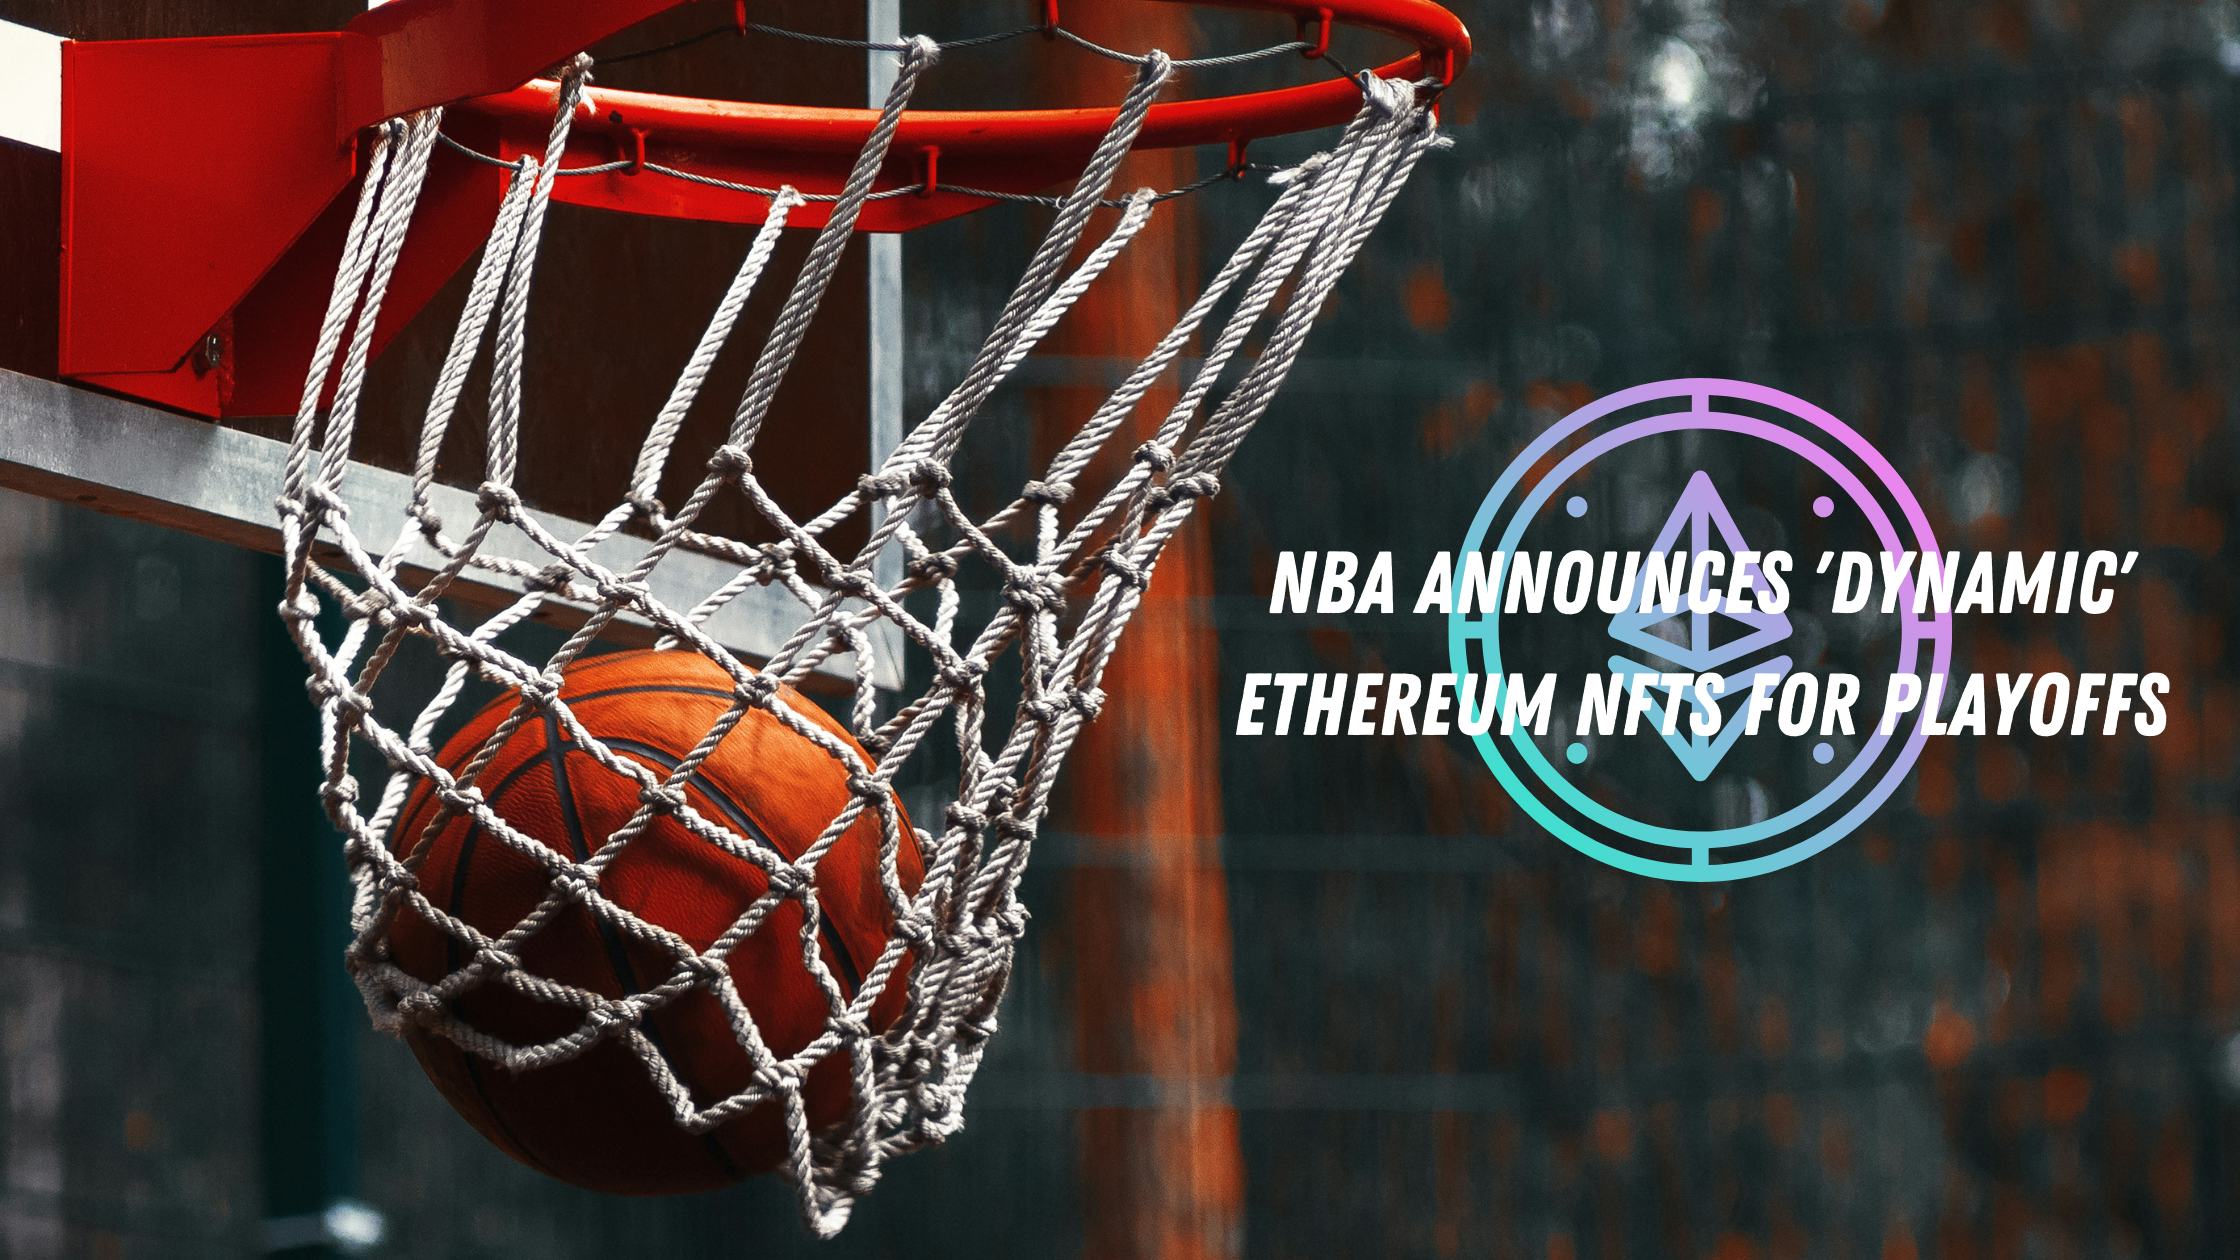 NBA Announces 'Dynamic' Ethereum NFTs for Playoffs